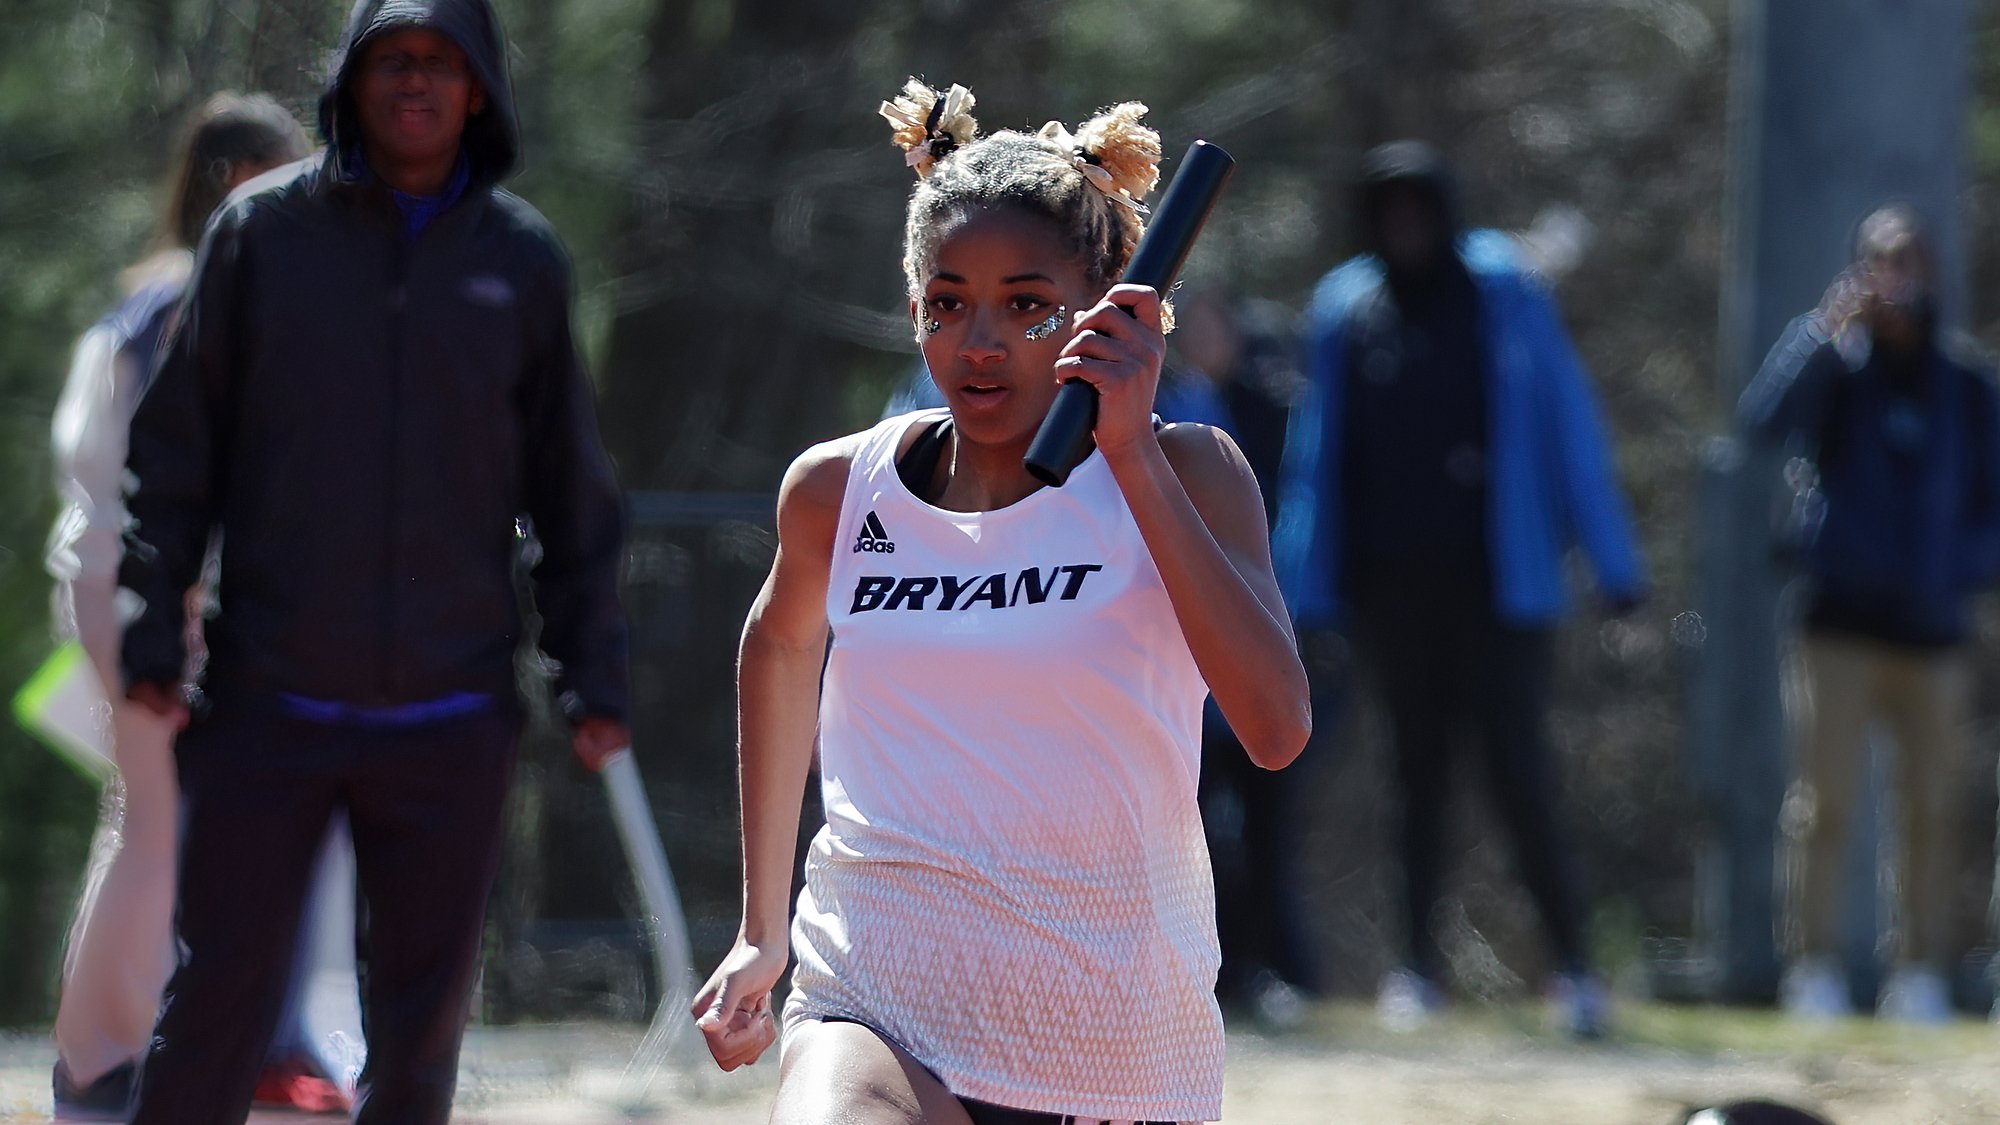 Hope Leads Bryant Performers at Providence Track Meets